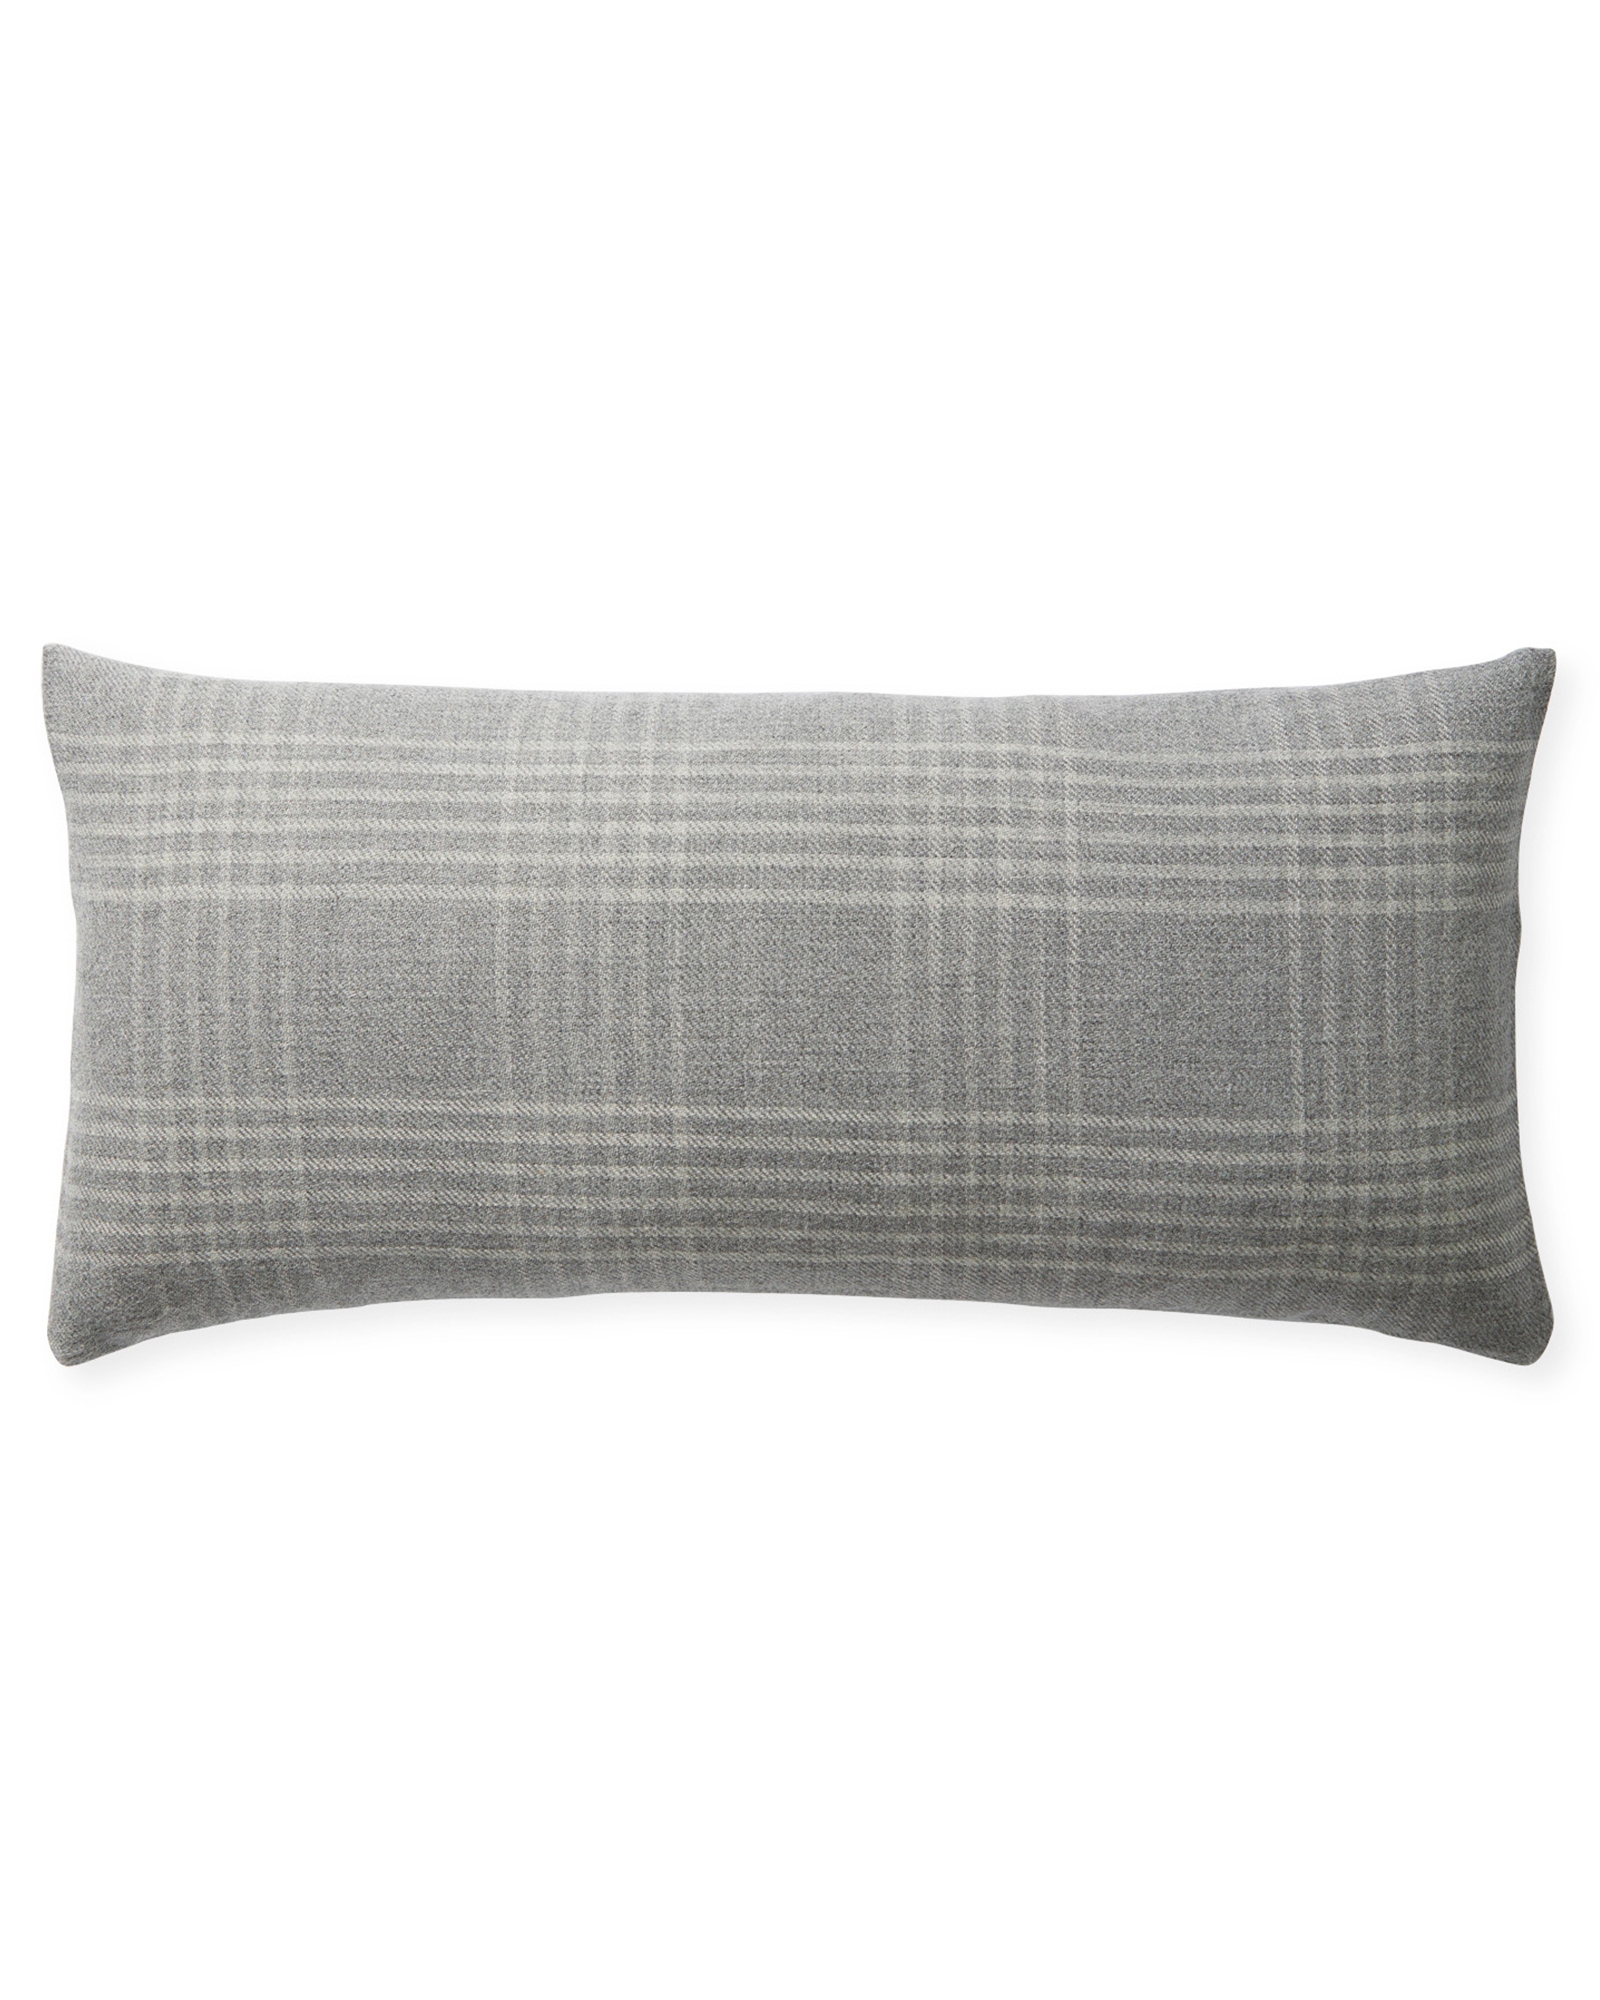 Blakely Plaid 14" x 30" Pillow Cover - Smoke - Insert sold separately - Image 0